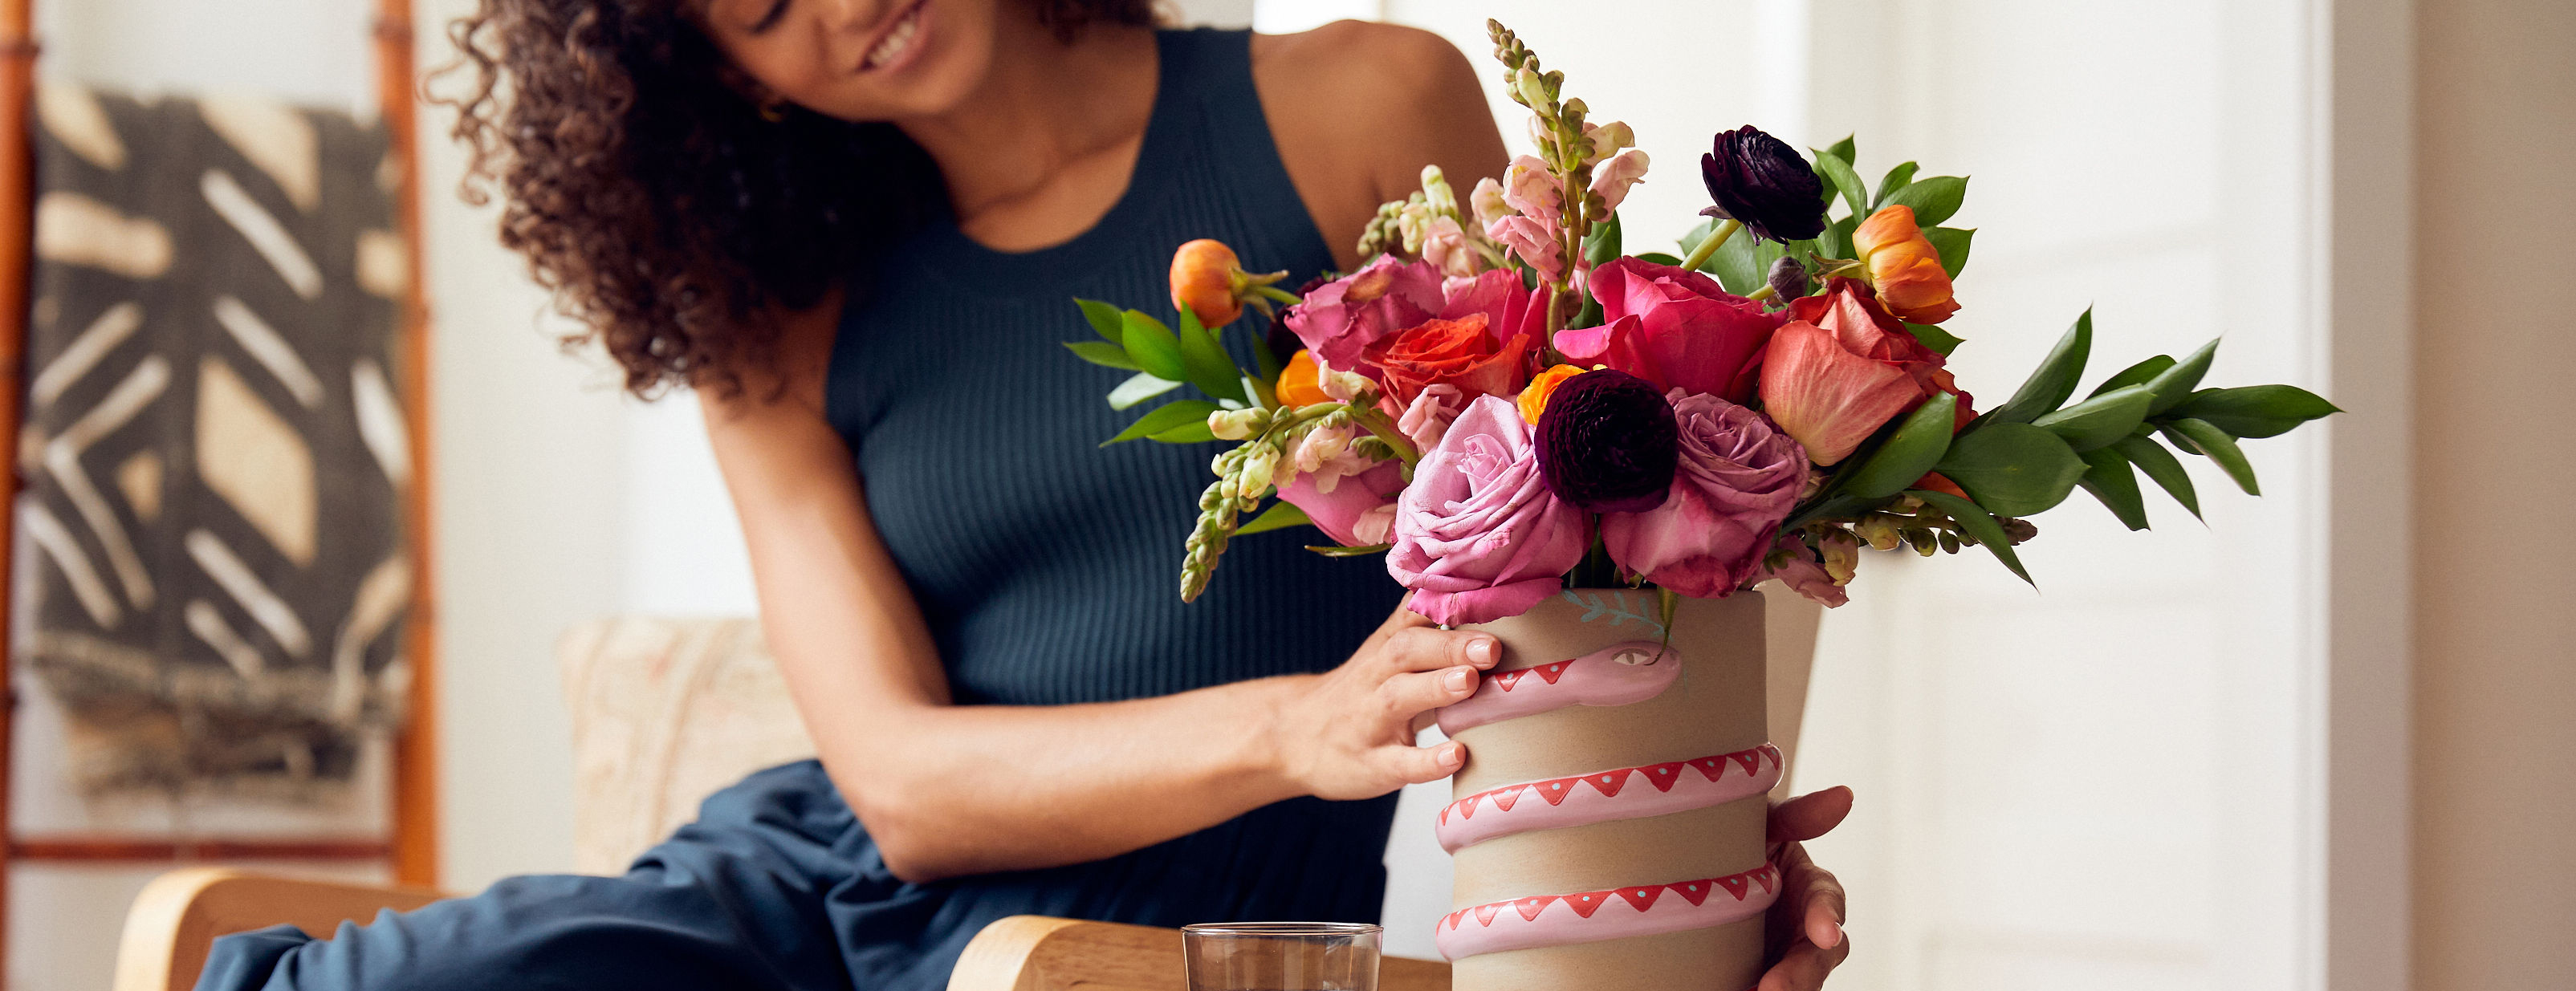 Woman decorating her home with summer flowers. Send summer flowers online with UrbanStems.